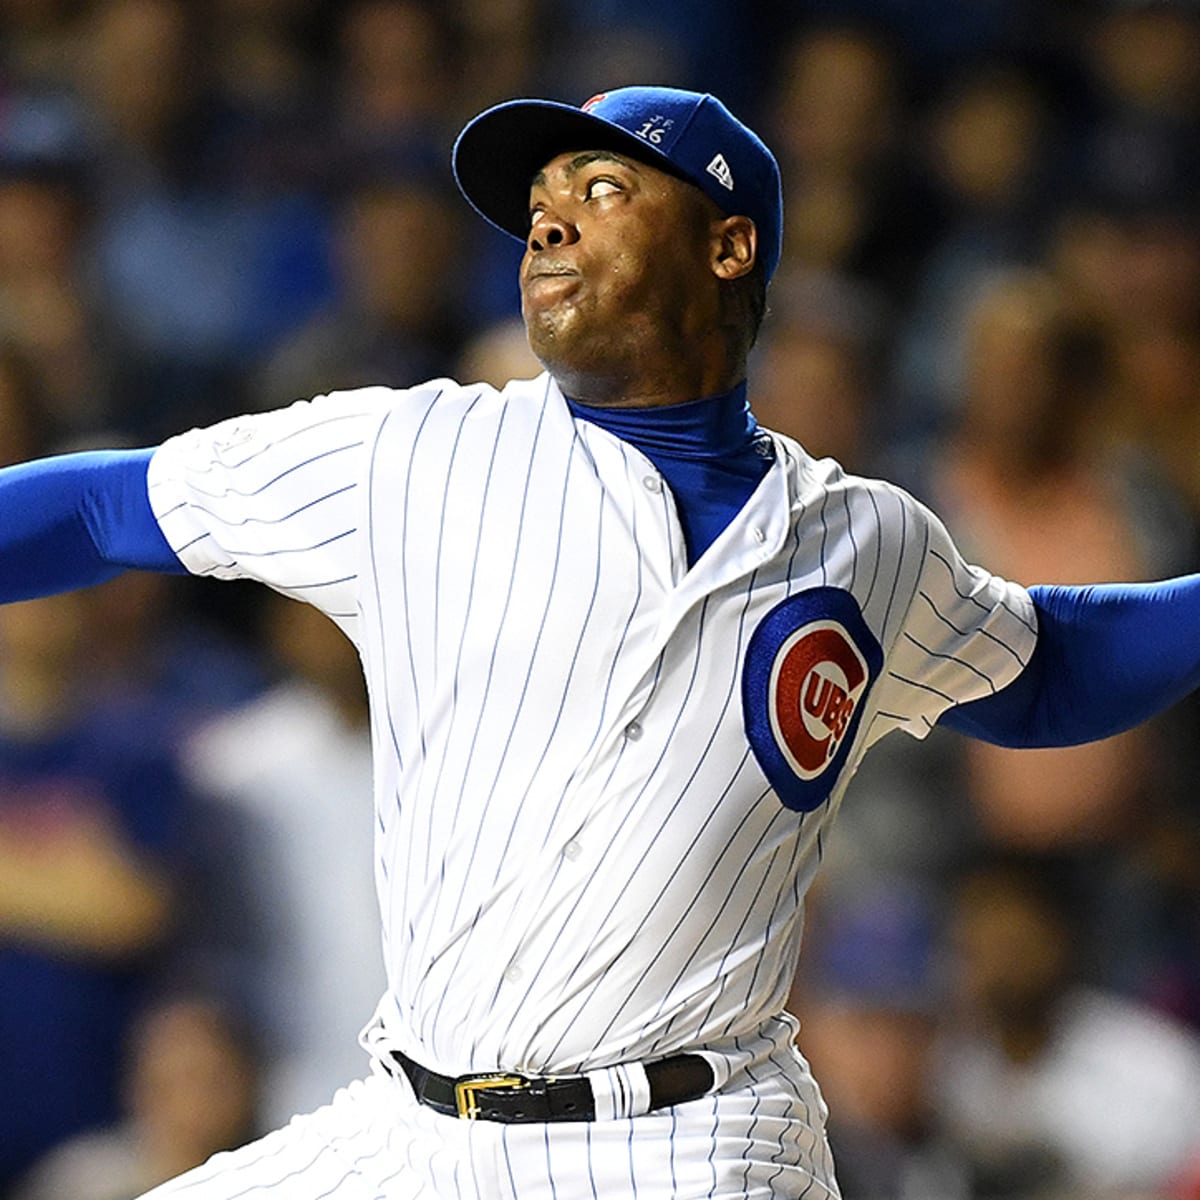 Aroldis Chapman: The rise and fall of a dominant closer